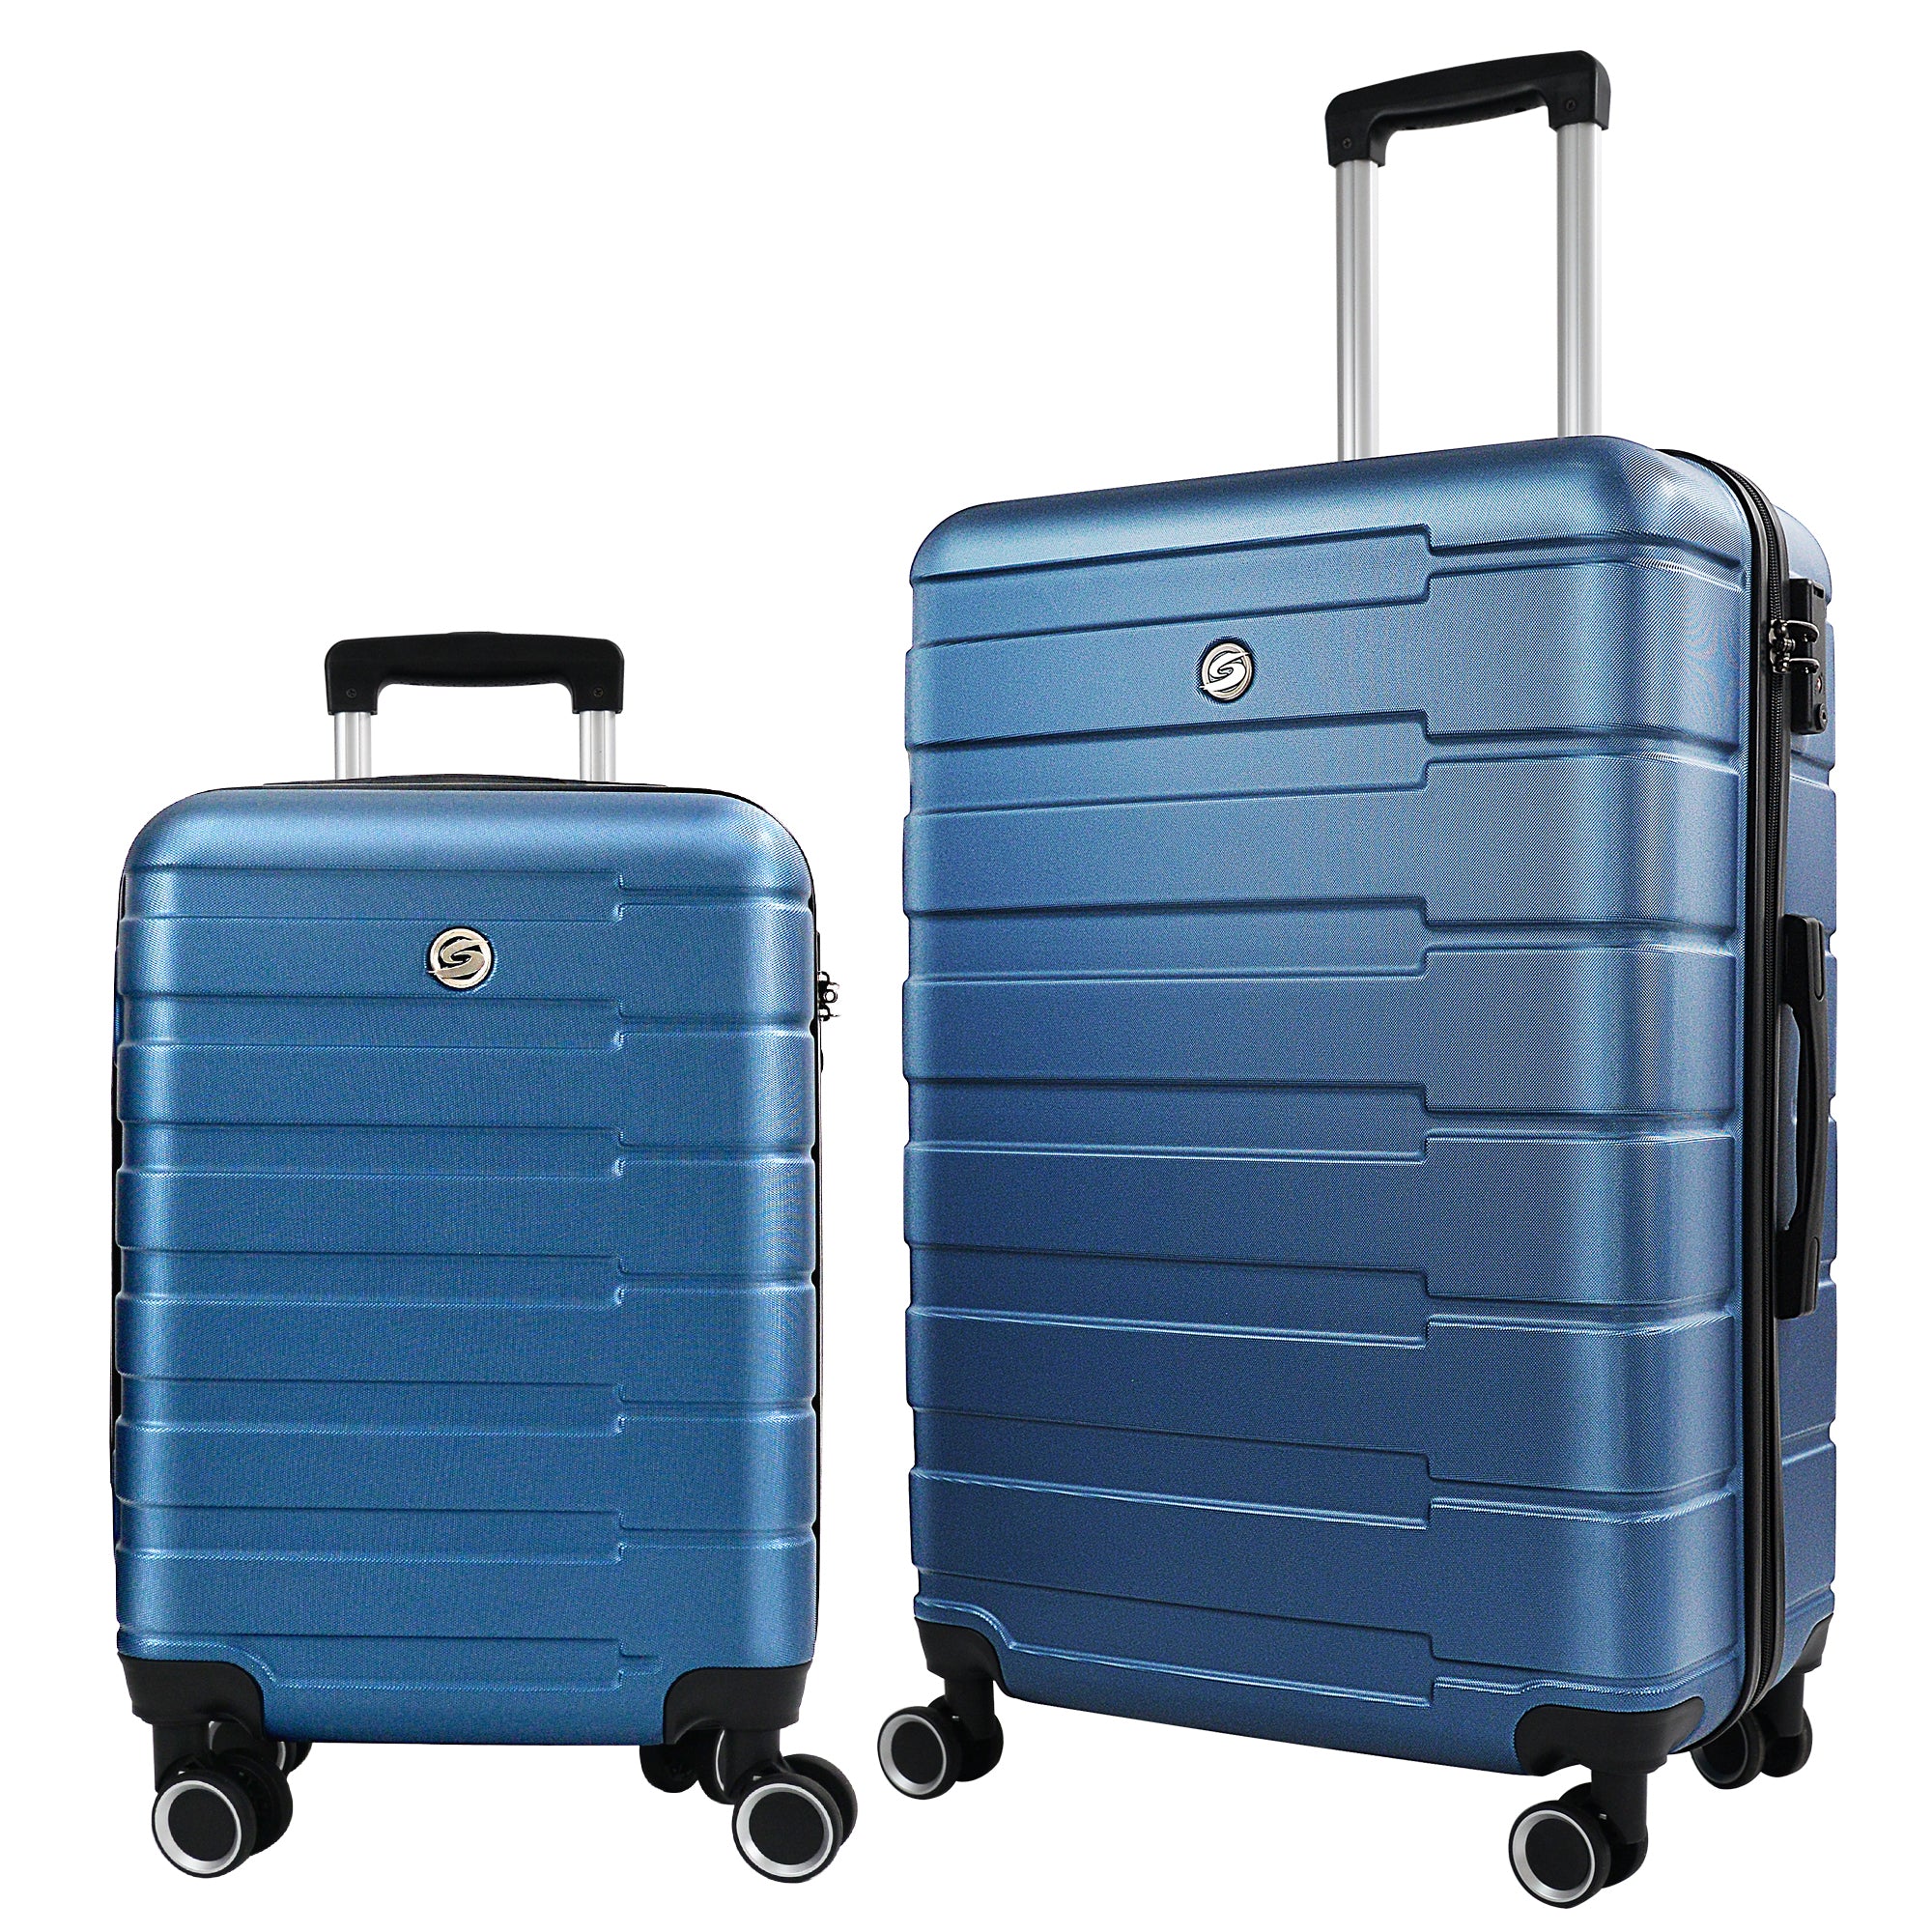 Luggage Sets 2 Piece, 20 inch 24 inch Carry on Luggage dark blue-abs